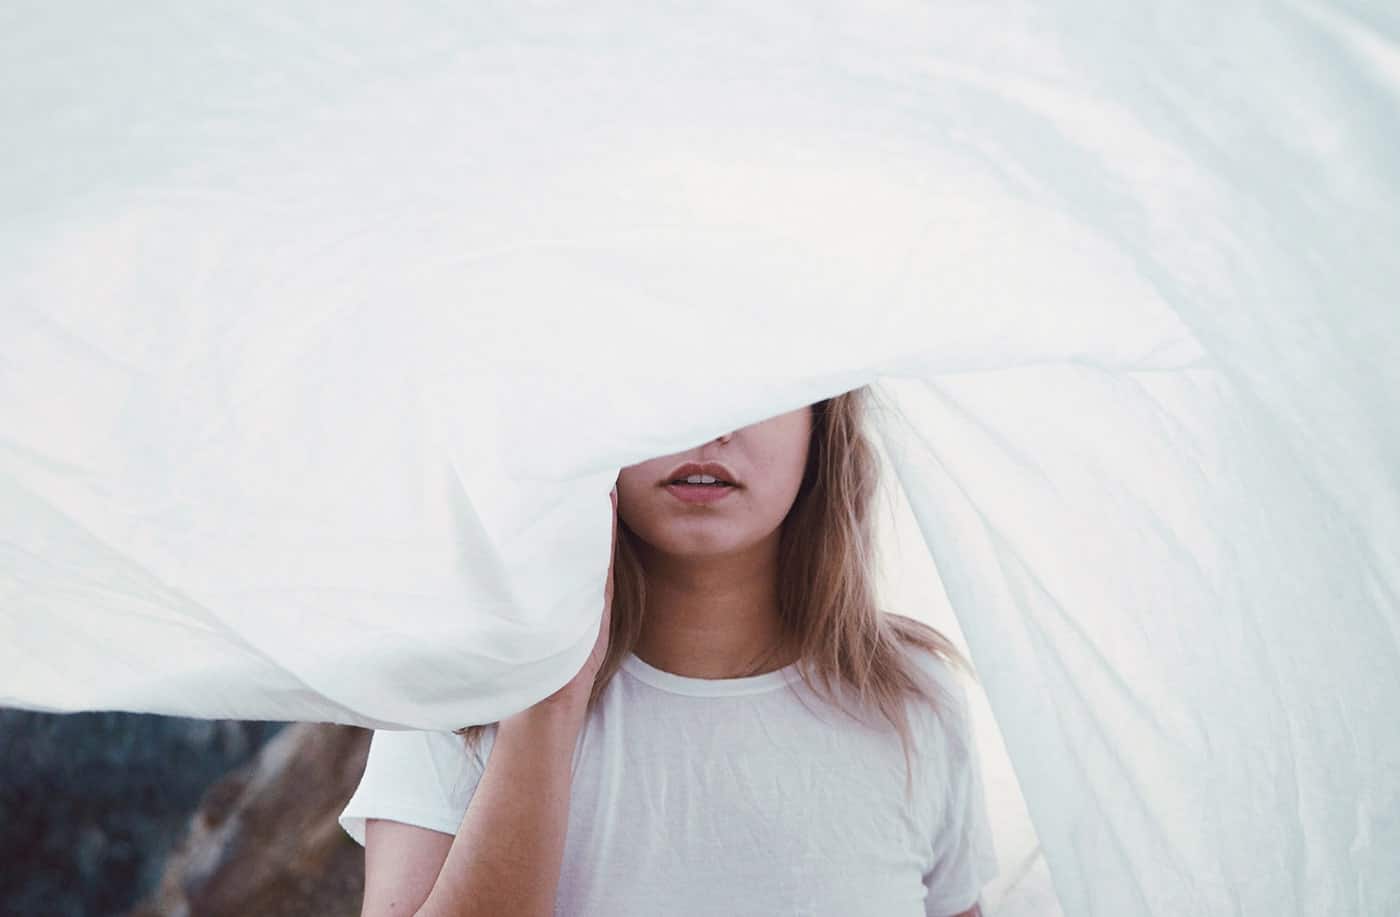 Woman standing behind white sheet covering face